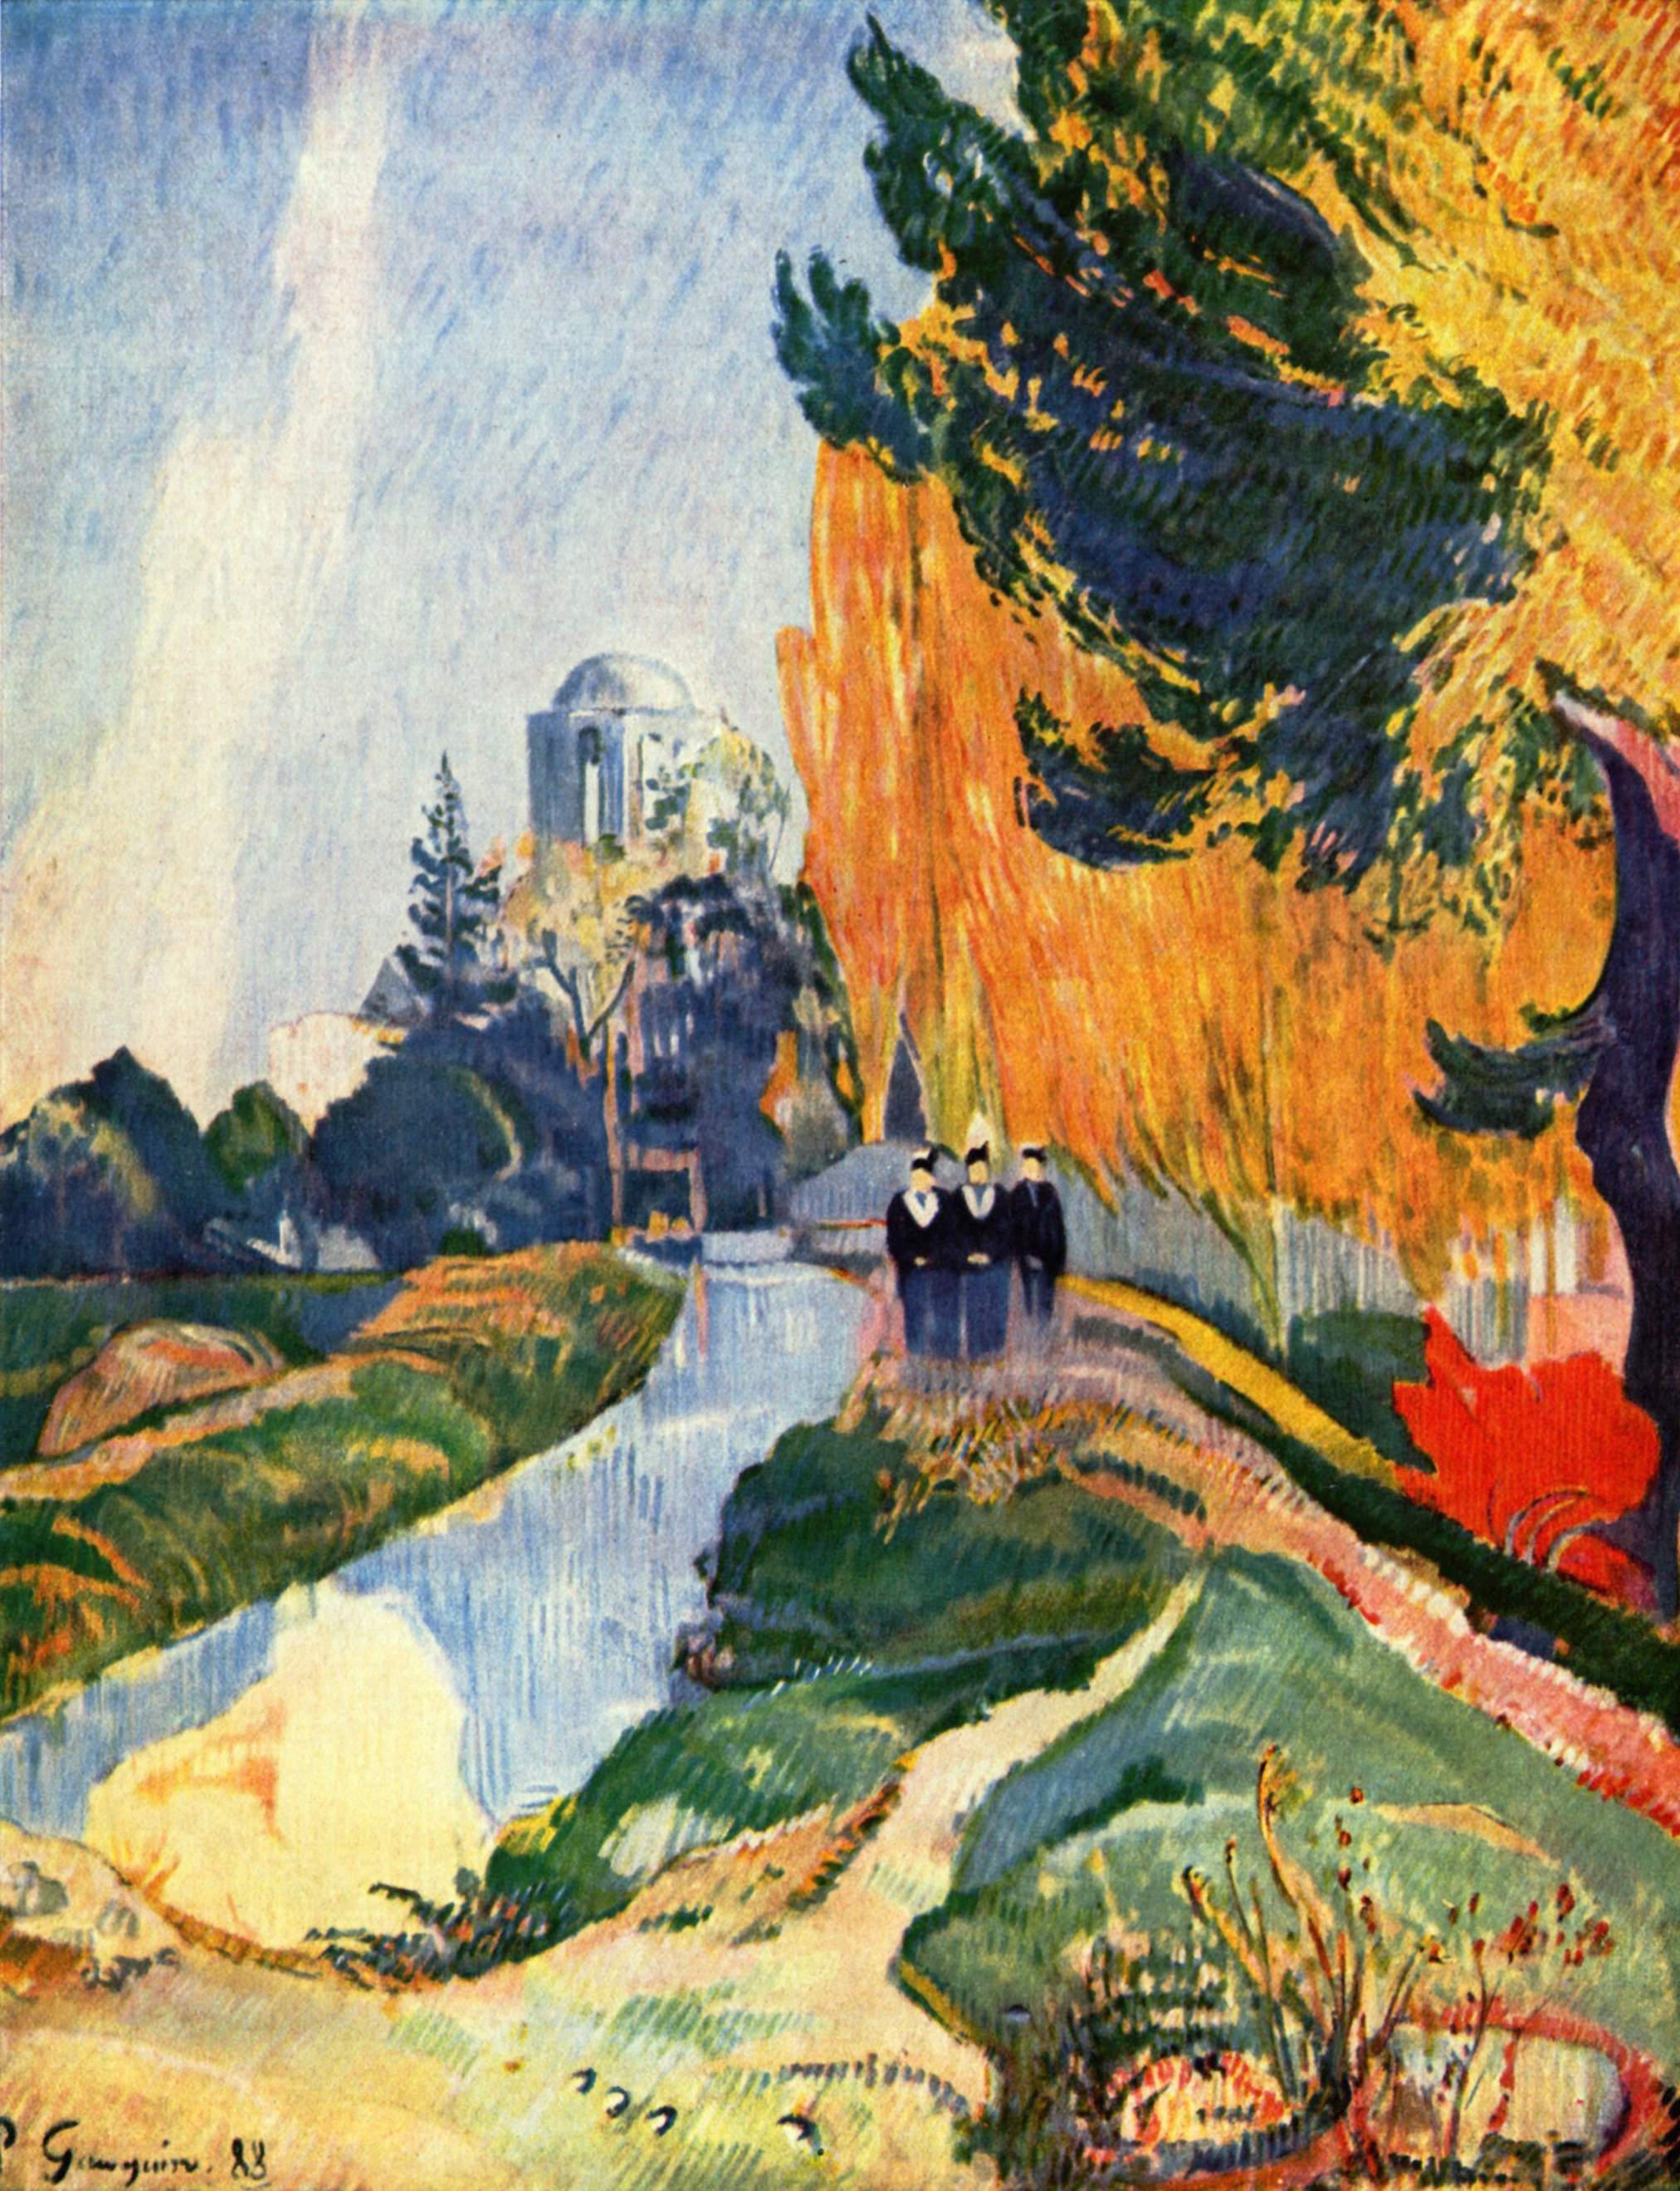 Os Alyscamps by Paul Gauguin - 1888 - 91.6 × 72.5 cm Musée d'Orsay